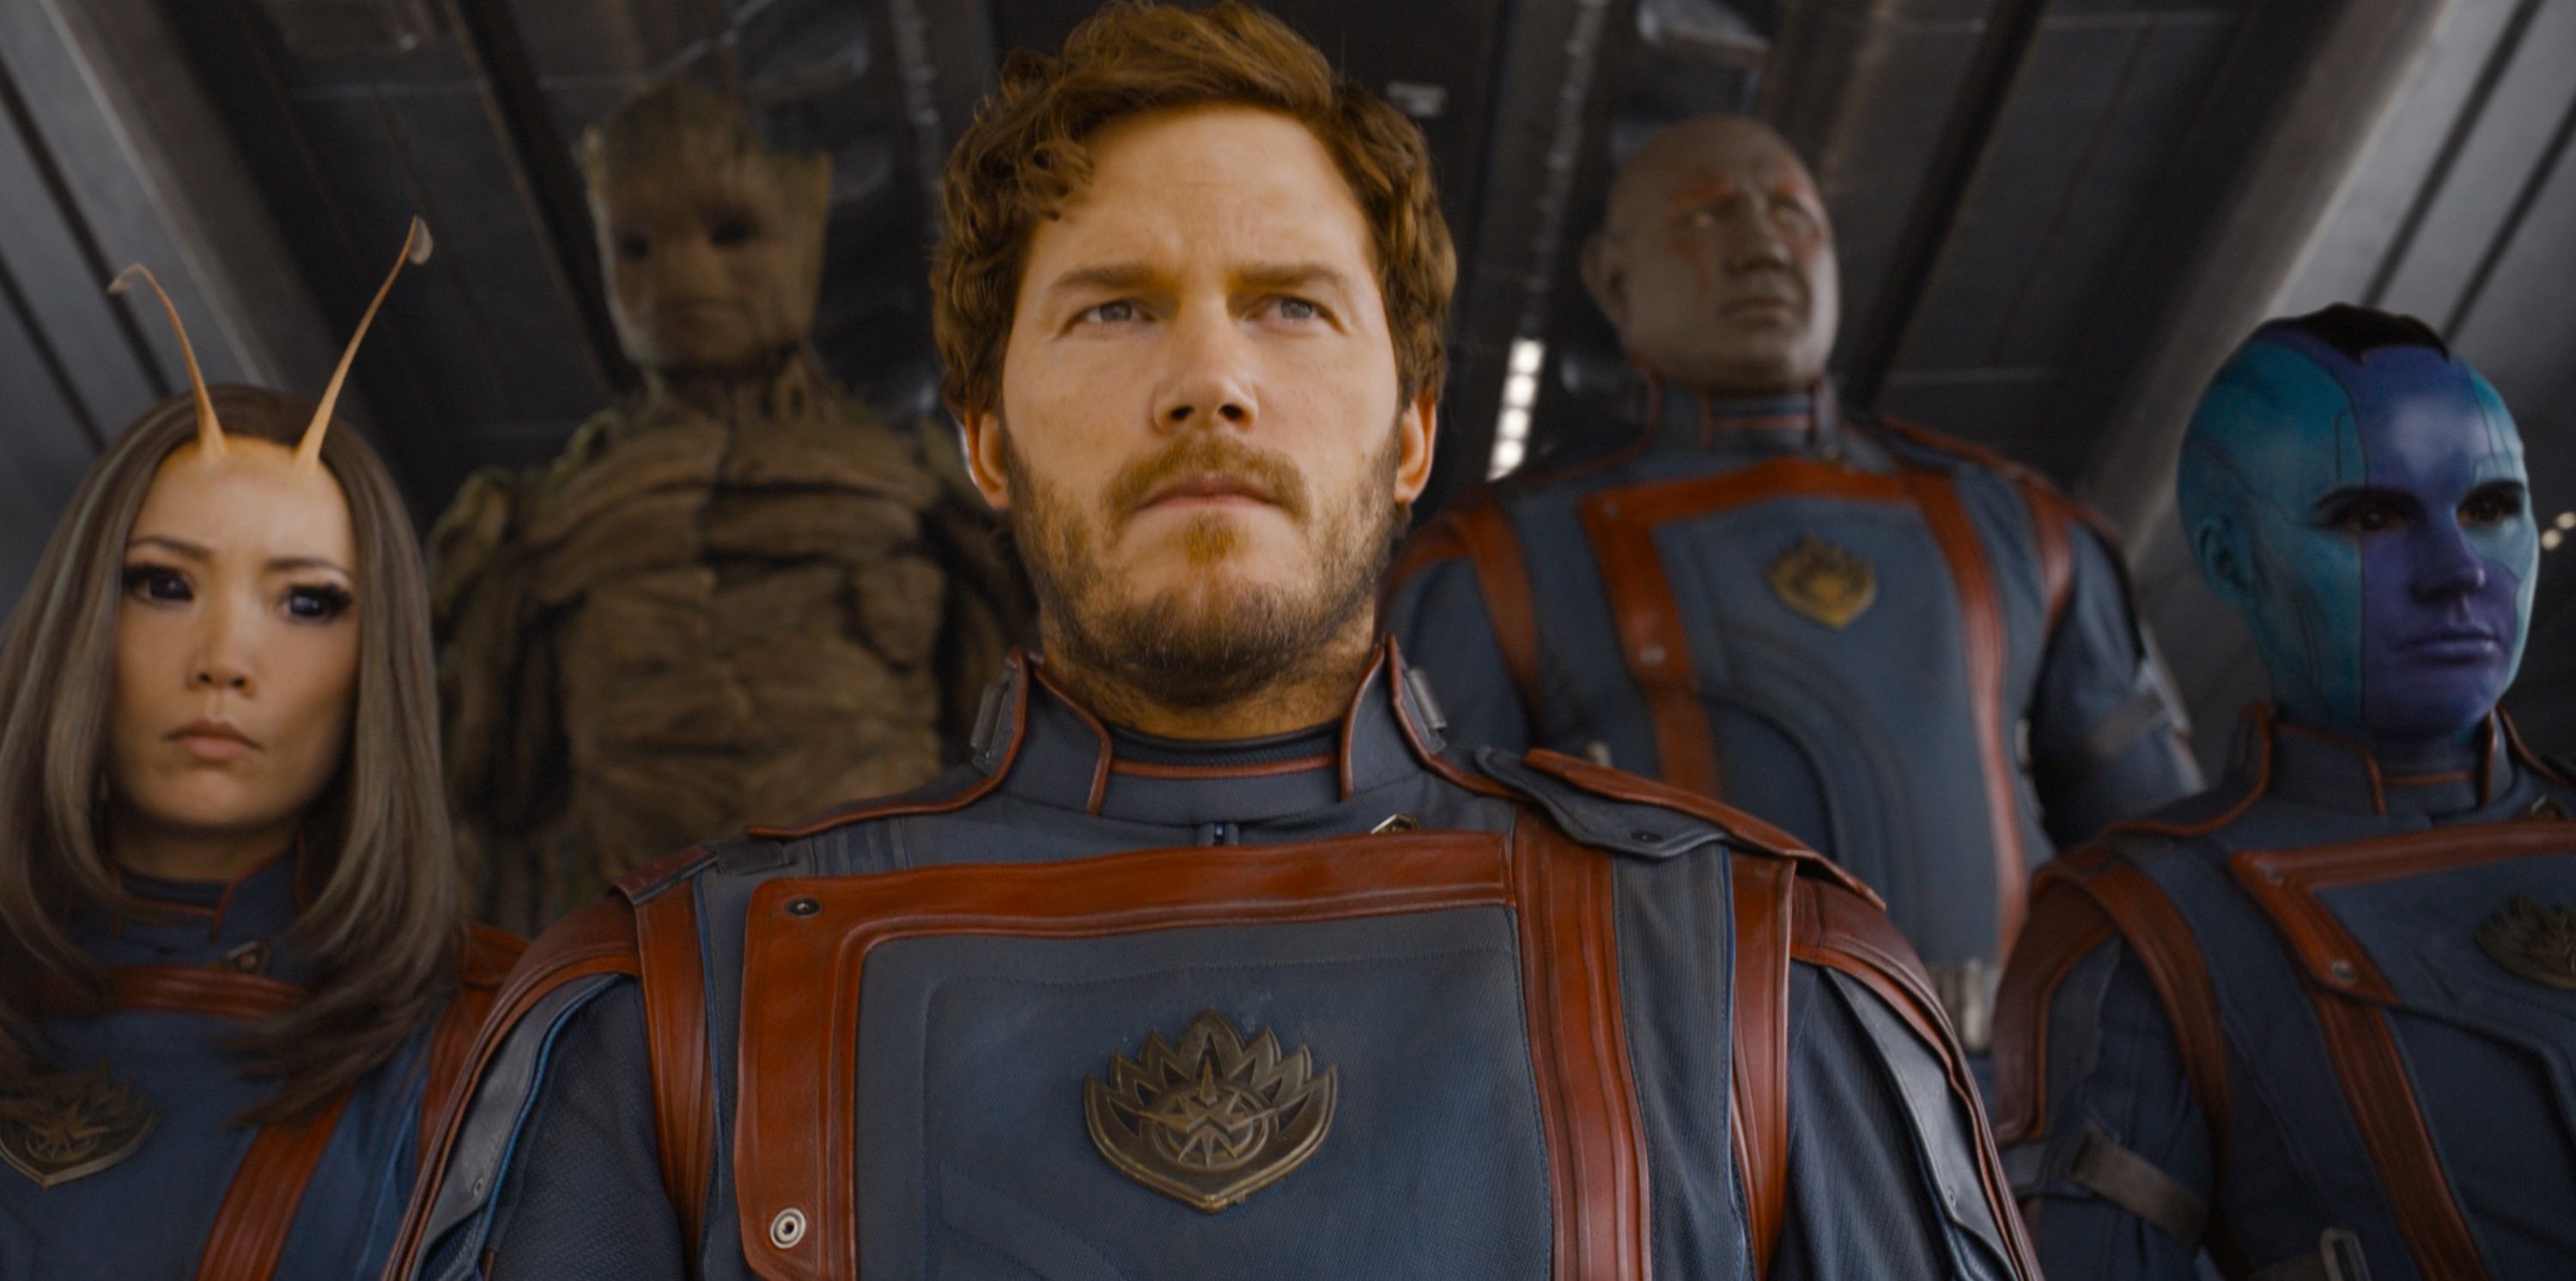 Chris Pratt as Peter Quill, aka Star-Lord, in Guardians of the Galaxy Vol. 3